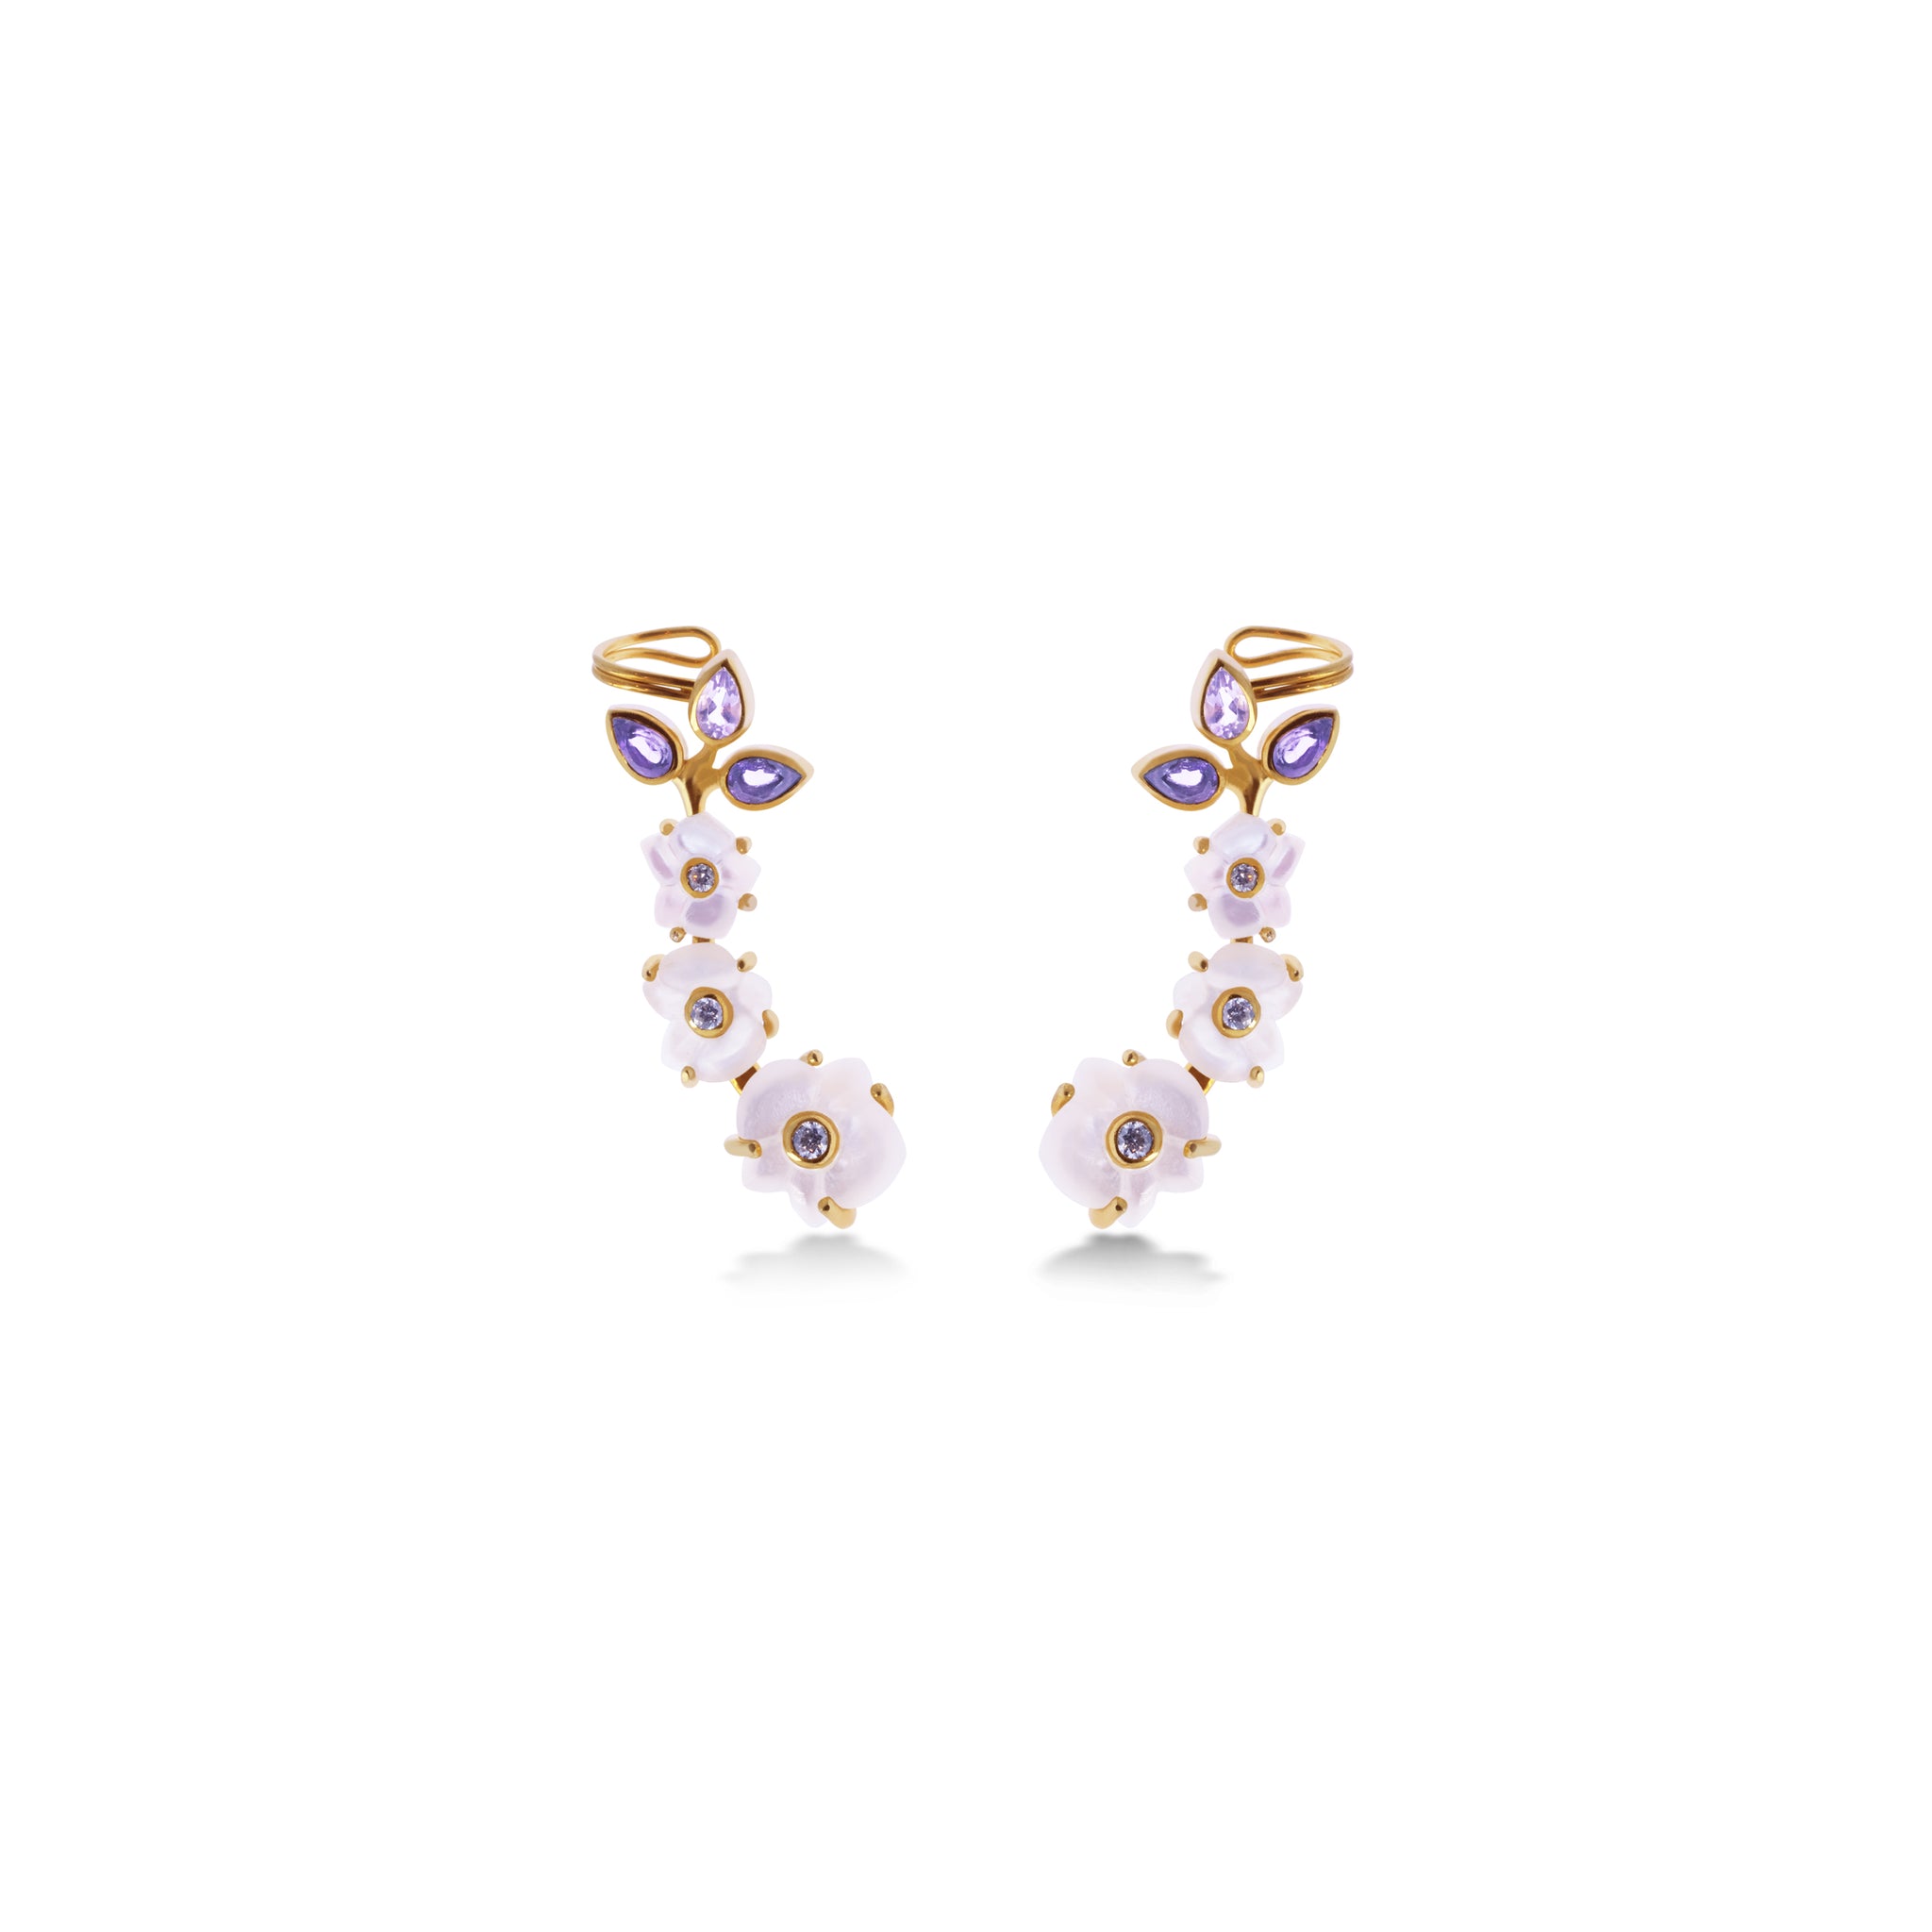 Earring Climber Anggrek Collection Sterling Silver 925 Gold Plated